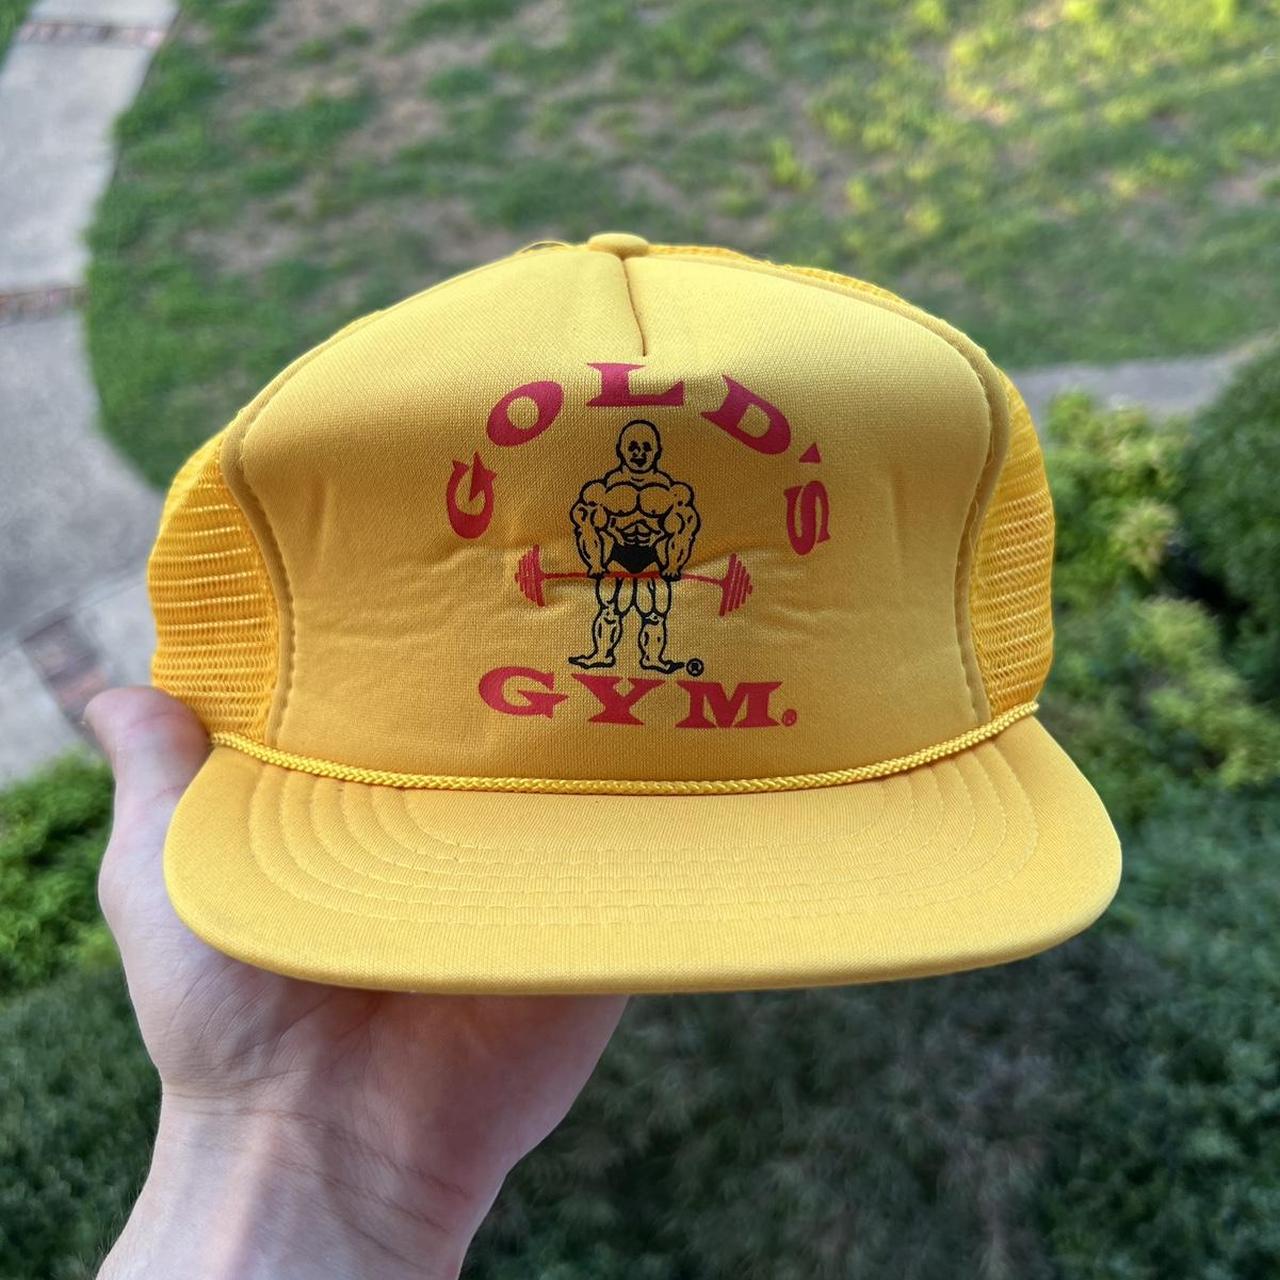 Vintage 90s Golds Gym Yellow and Red Snapback... - Depop